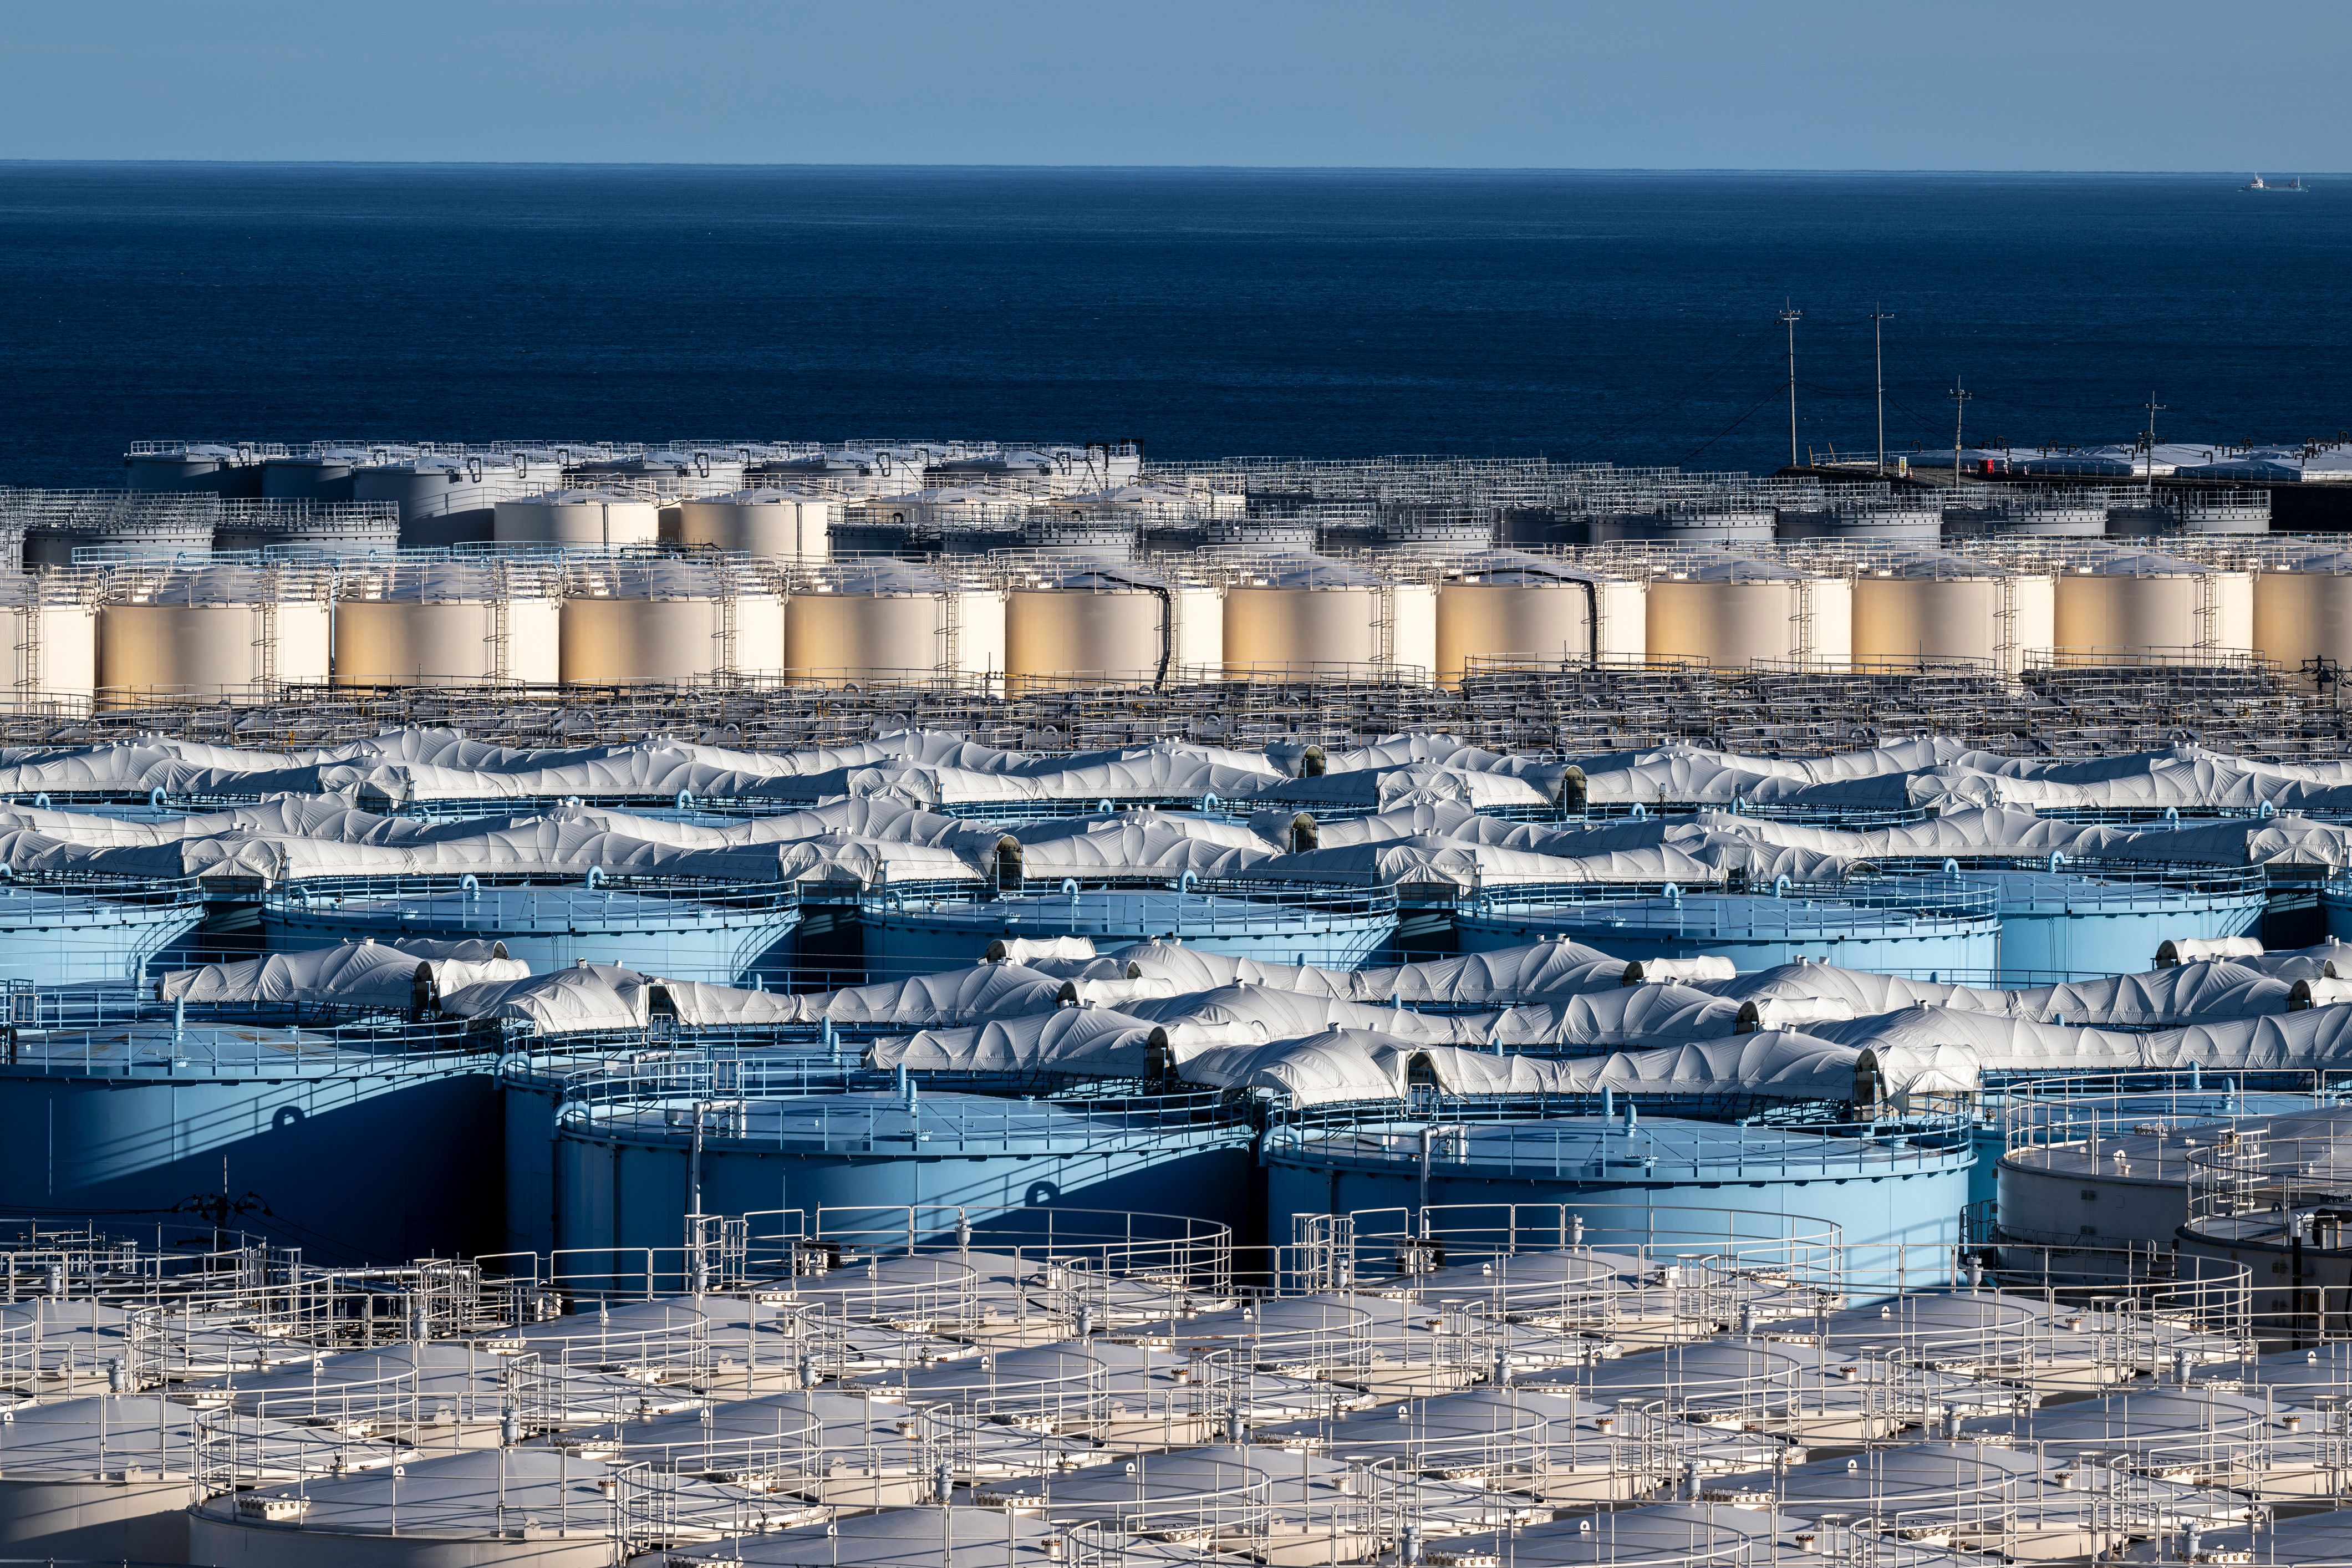 Storage tanks for contaminated water at the Fukushima Daiichi nuclear power plant in Japan, Jan. 20, 2023. (Philip Fong—AFP/Getty Images)